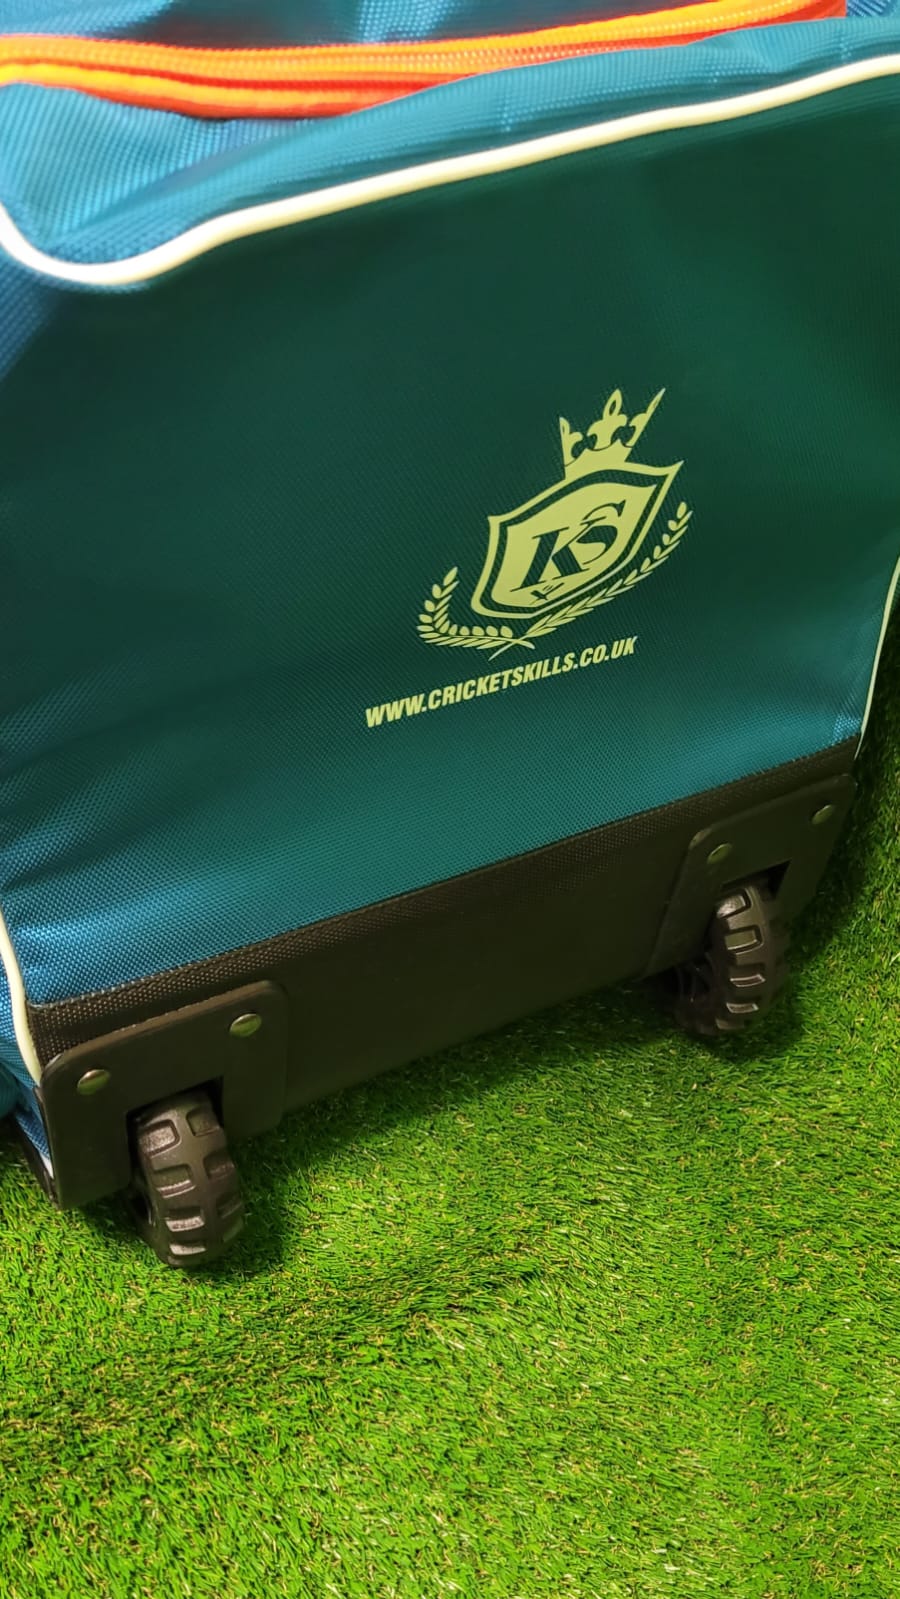 CA Players Edition Cricket Kit Bag : Buy Online At Best Prices In Pakistan  | Bucket.pk